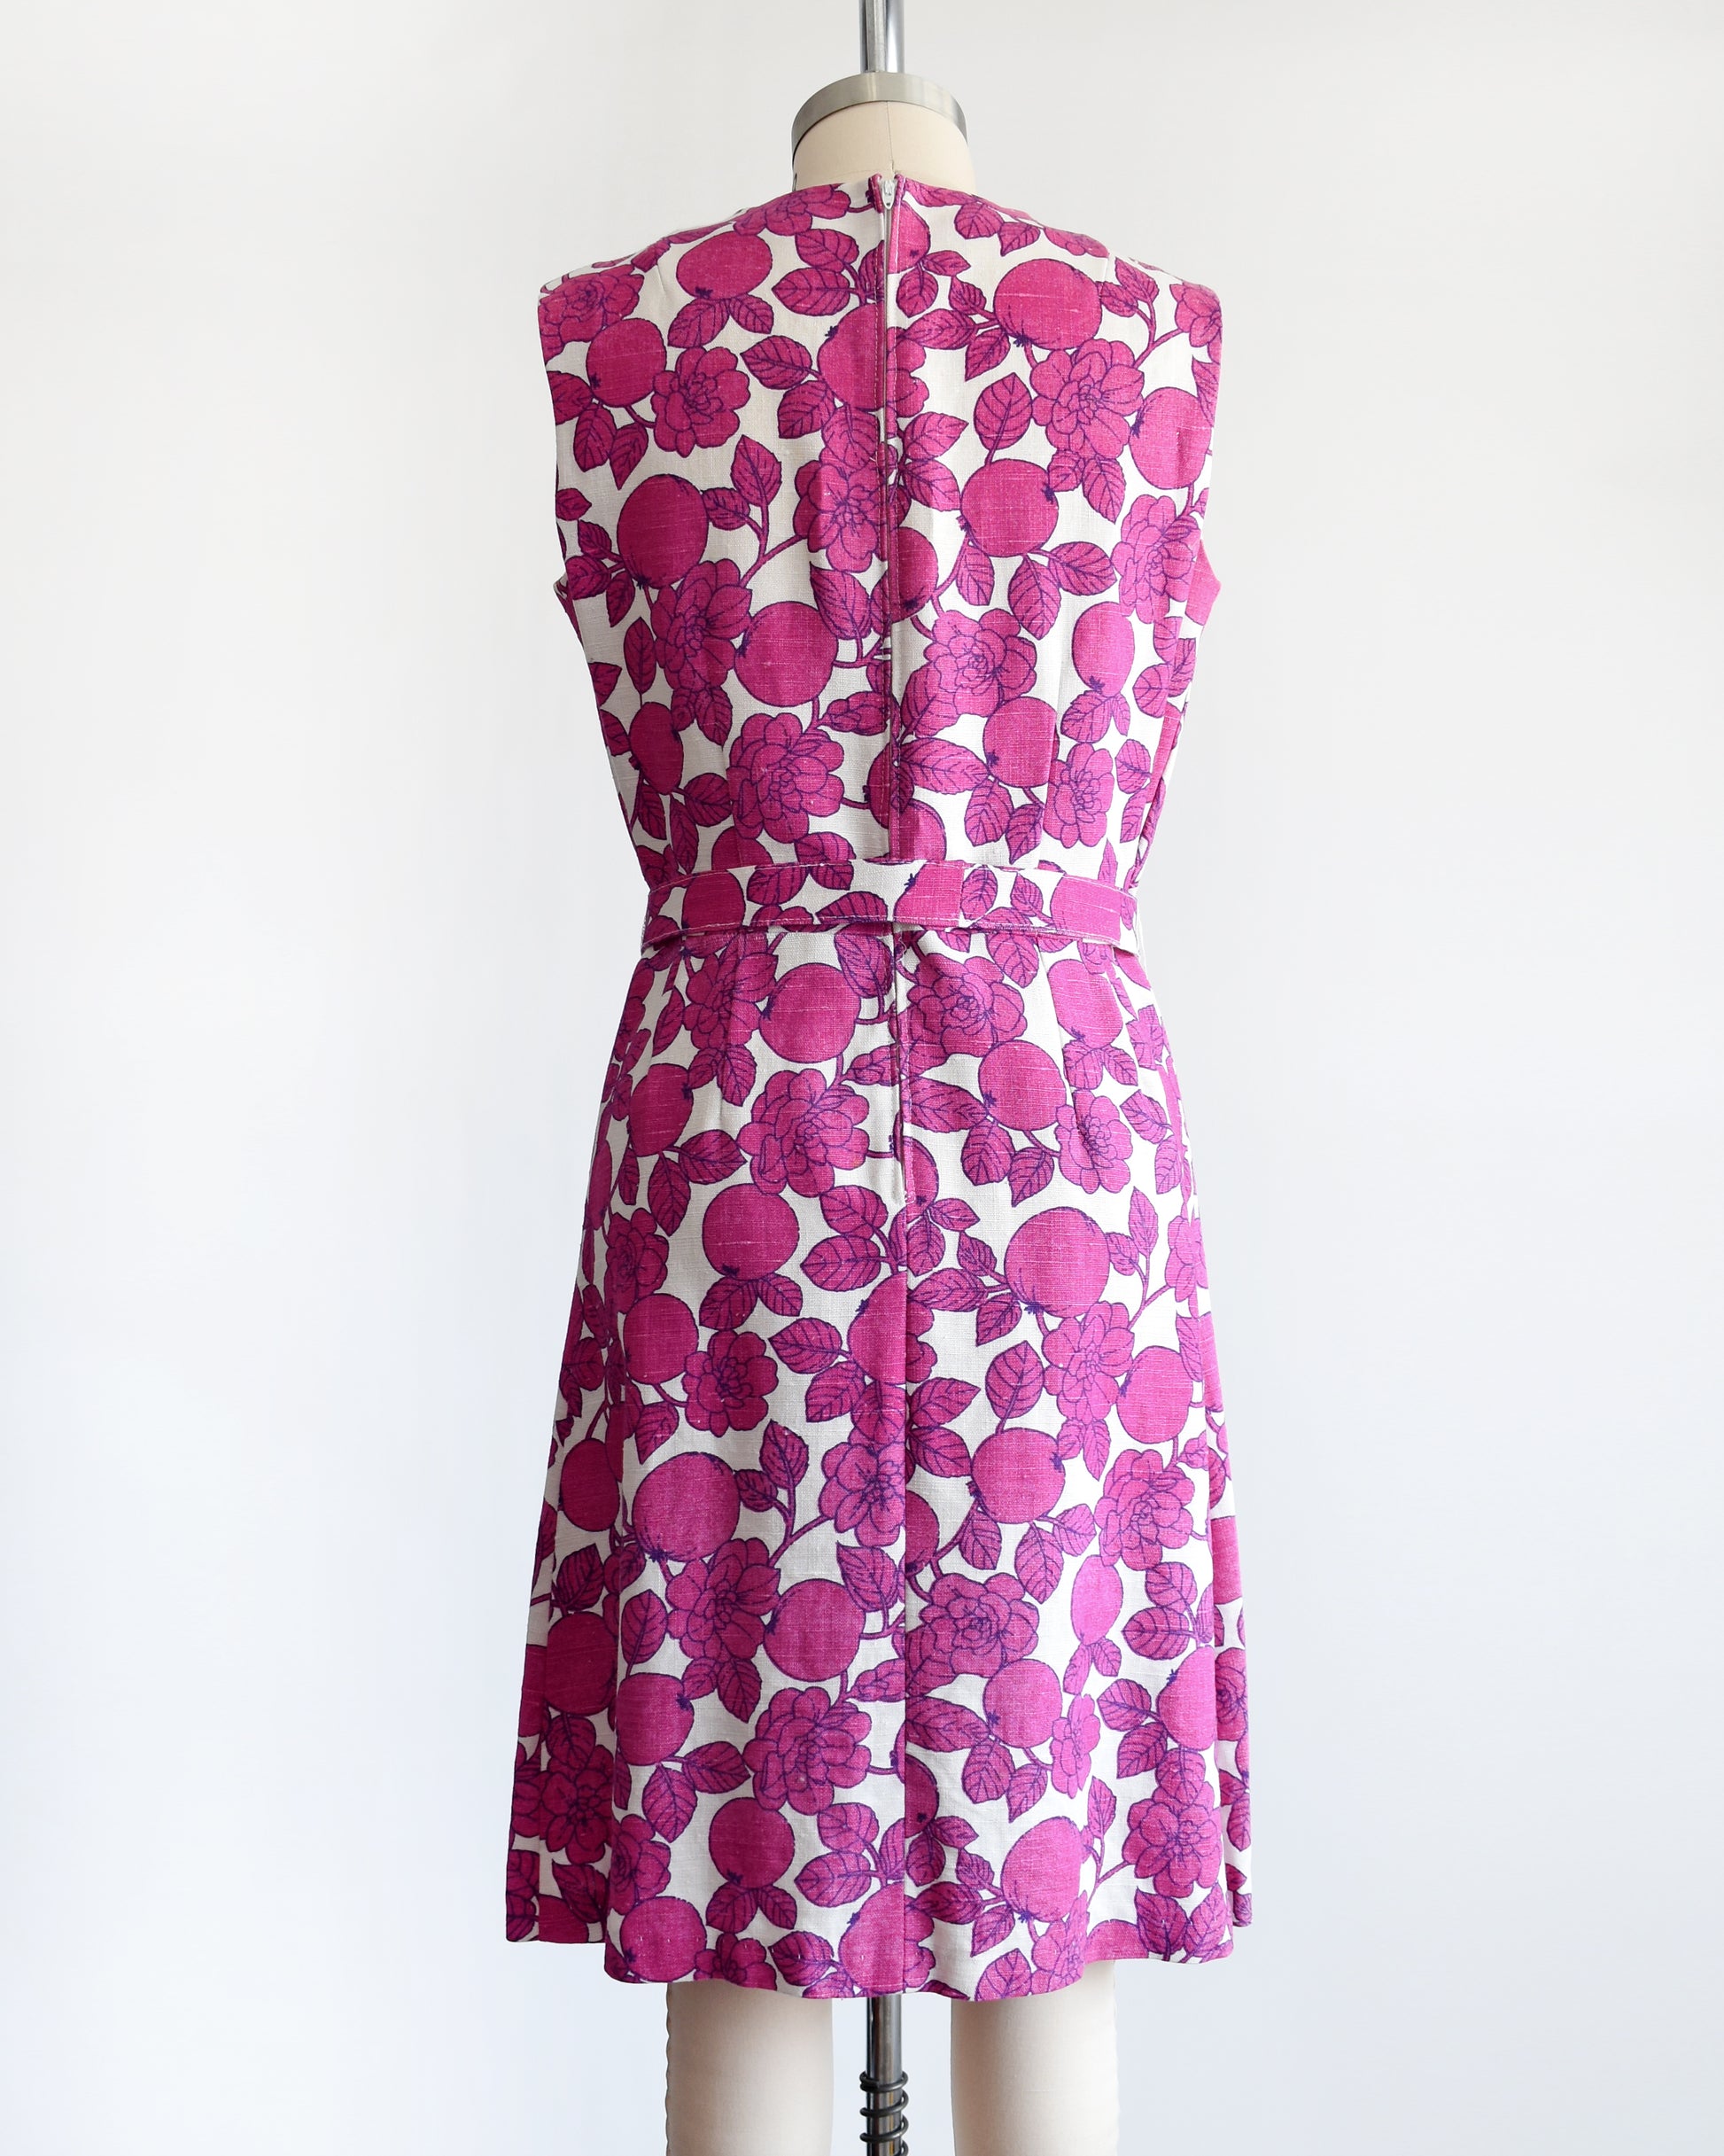 back view of a vintage 1960s magenta and white floral and fruit print dress